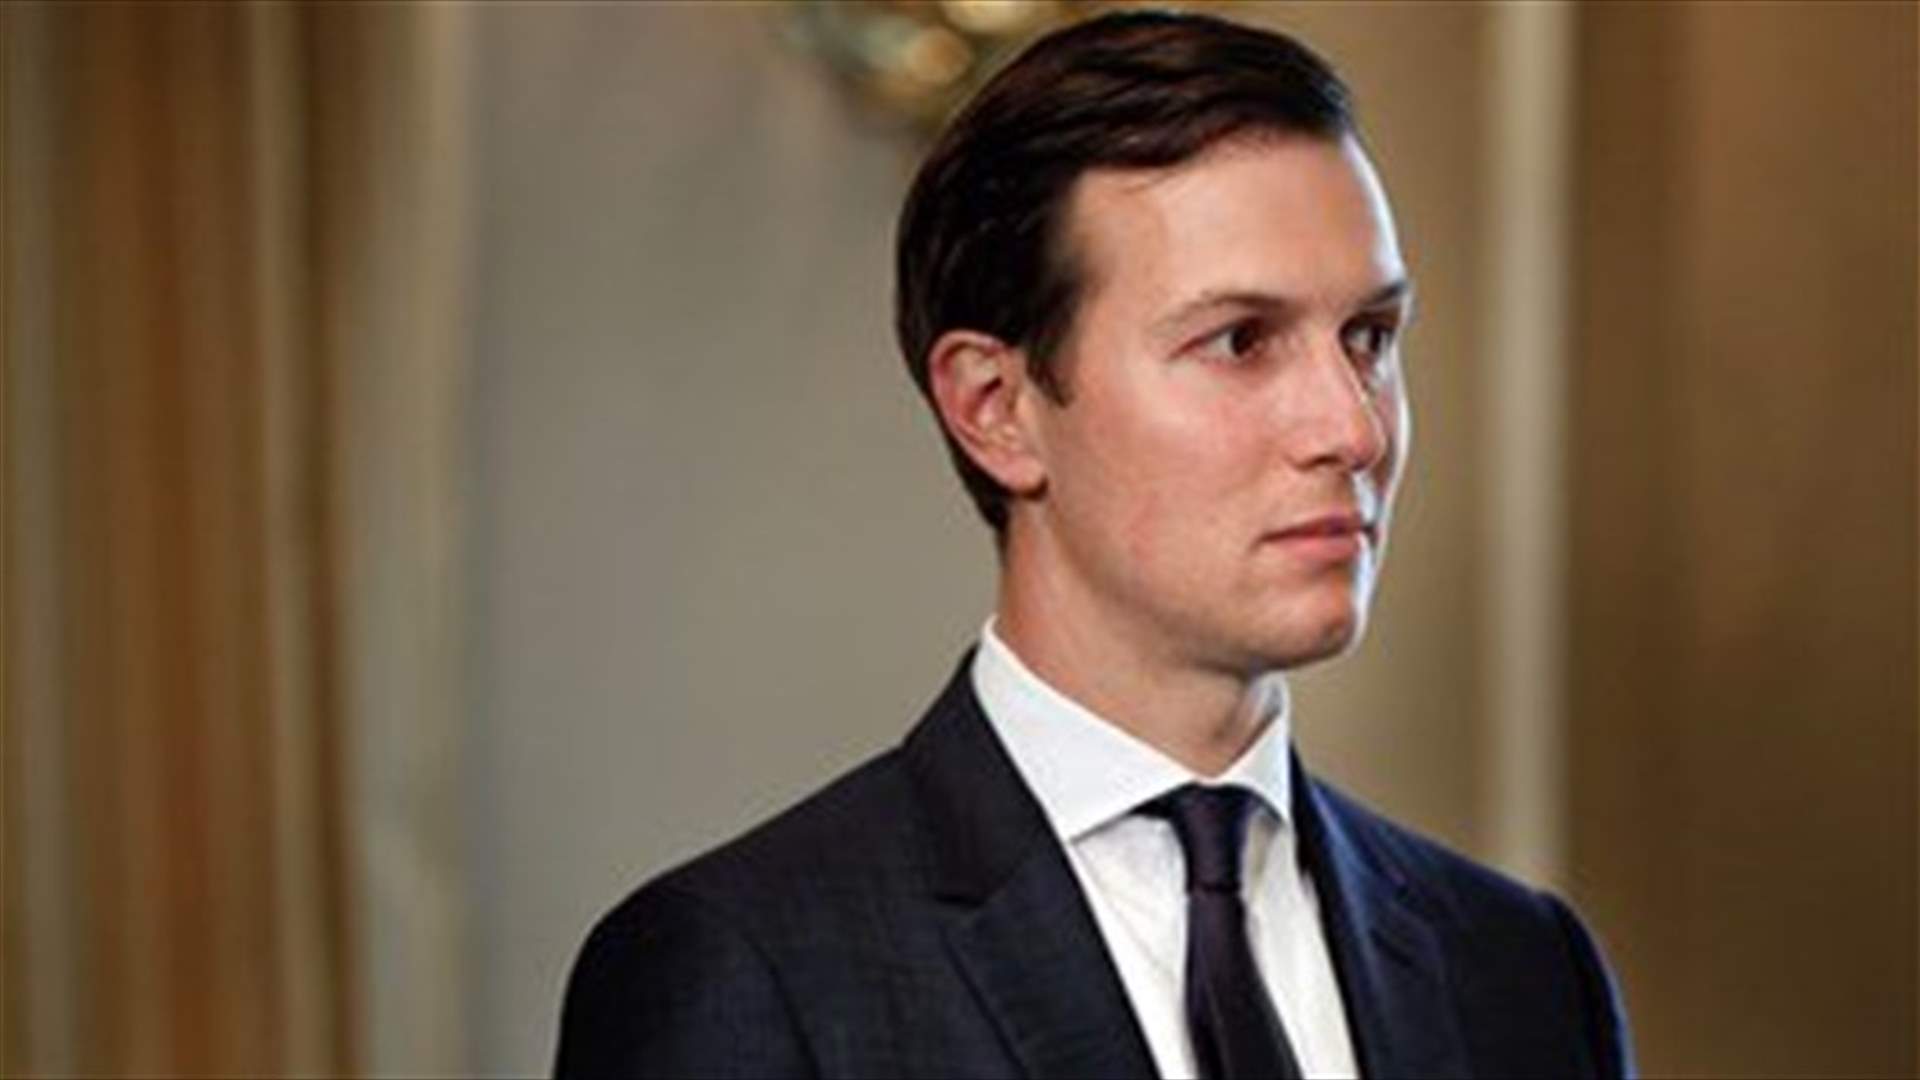 White House&#39;s Kushner urges world to keep &#39;open mind&#39; about upcoming Middle East plan -source